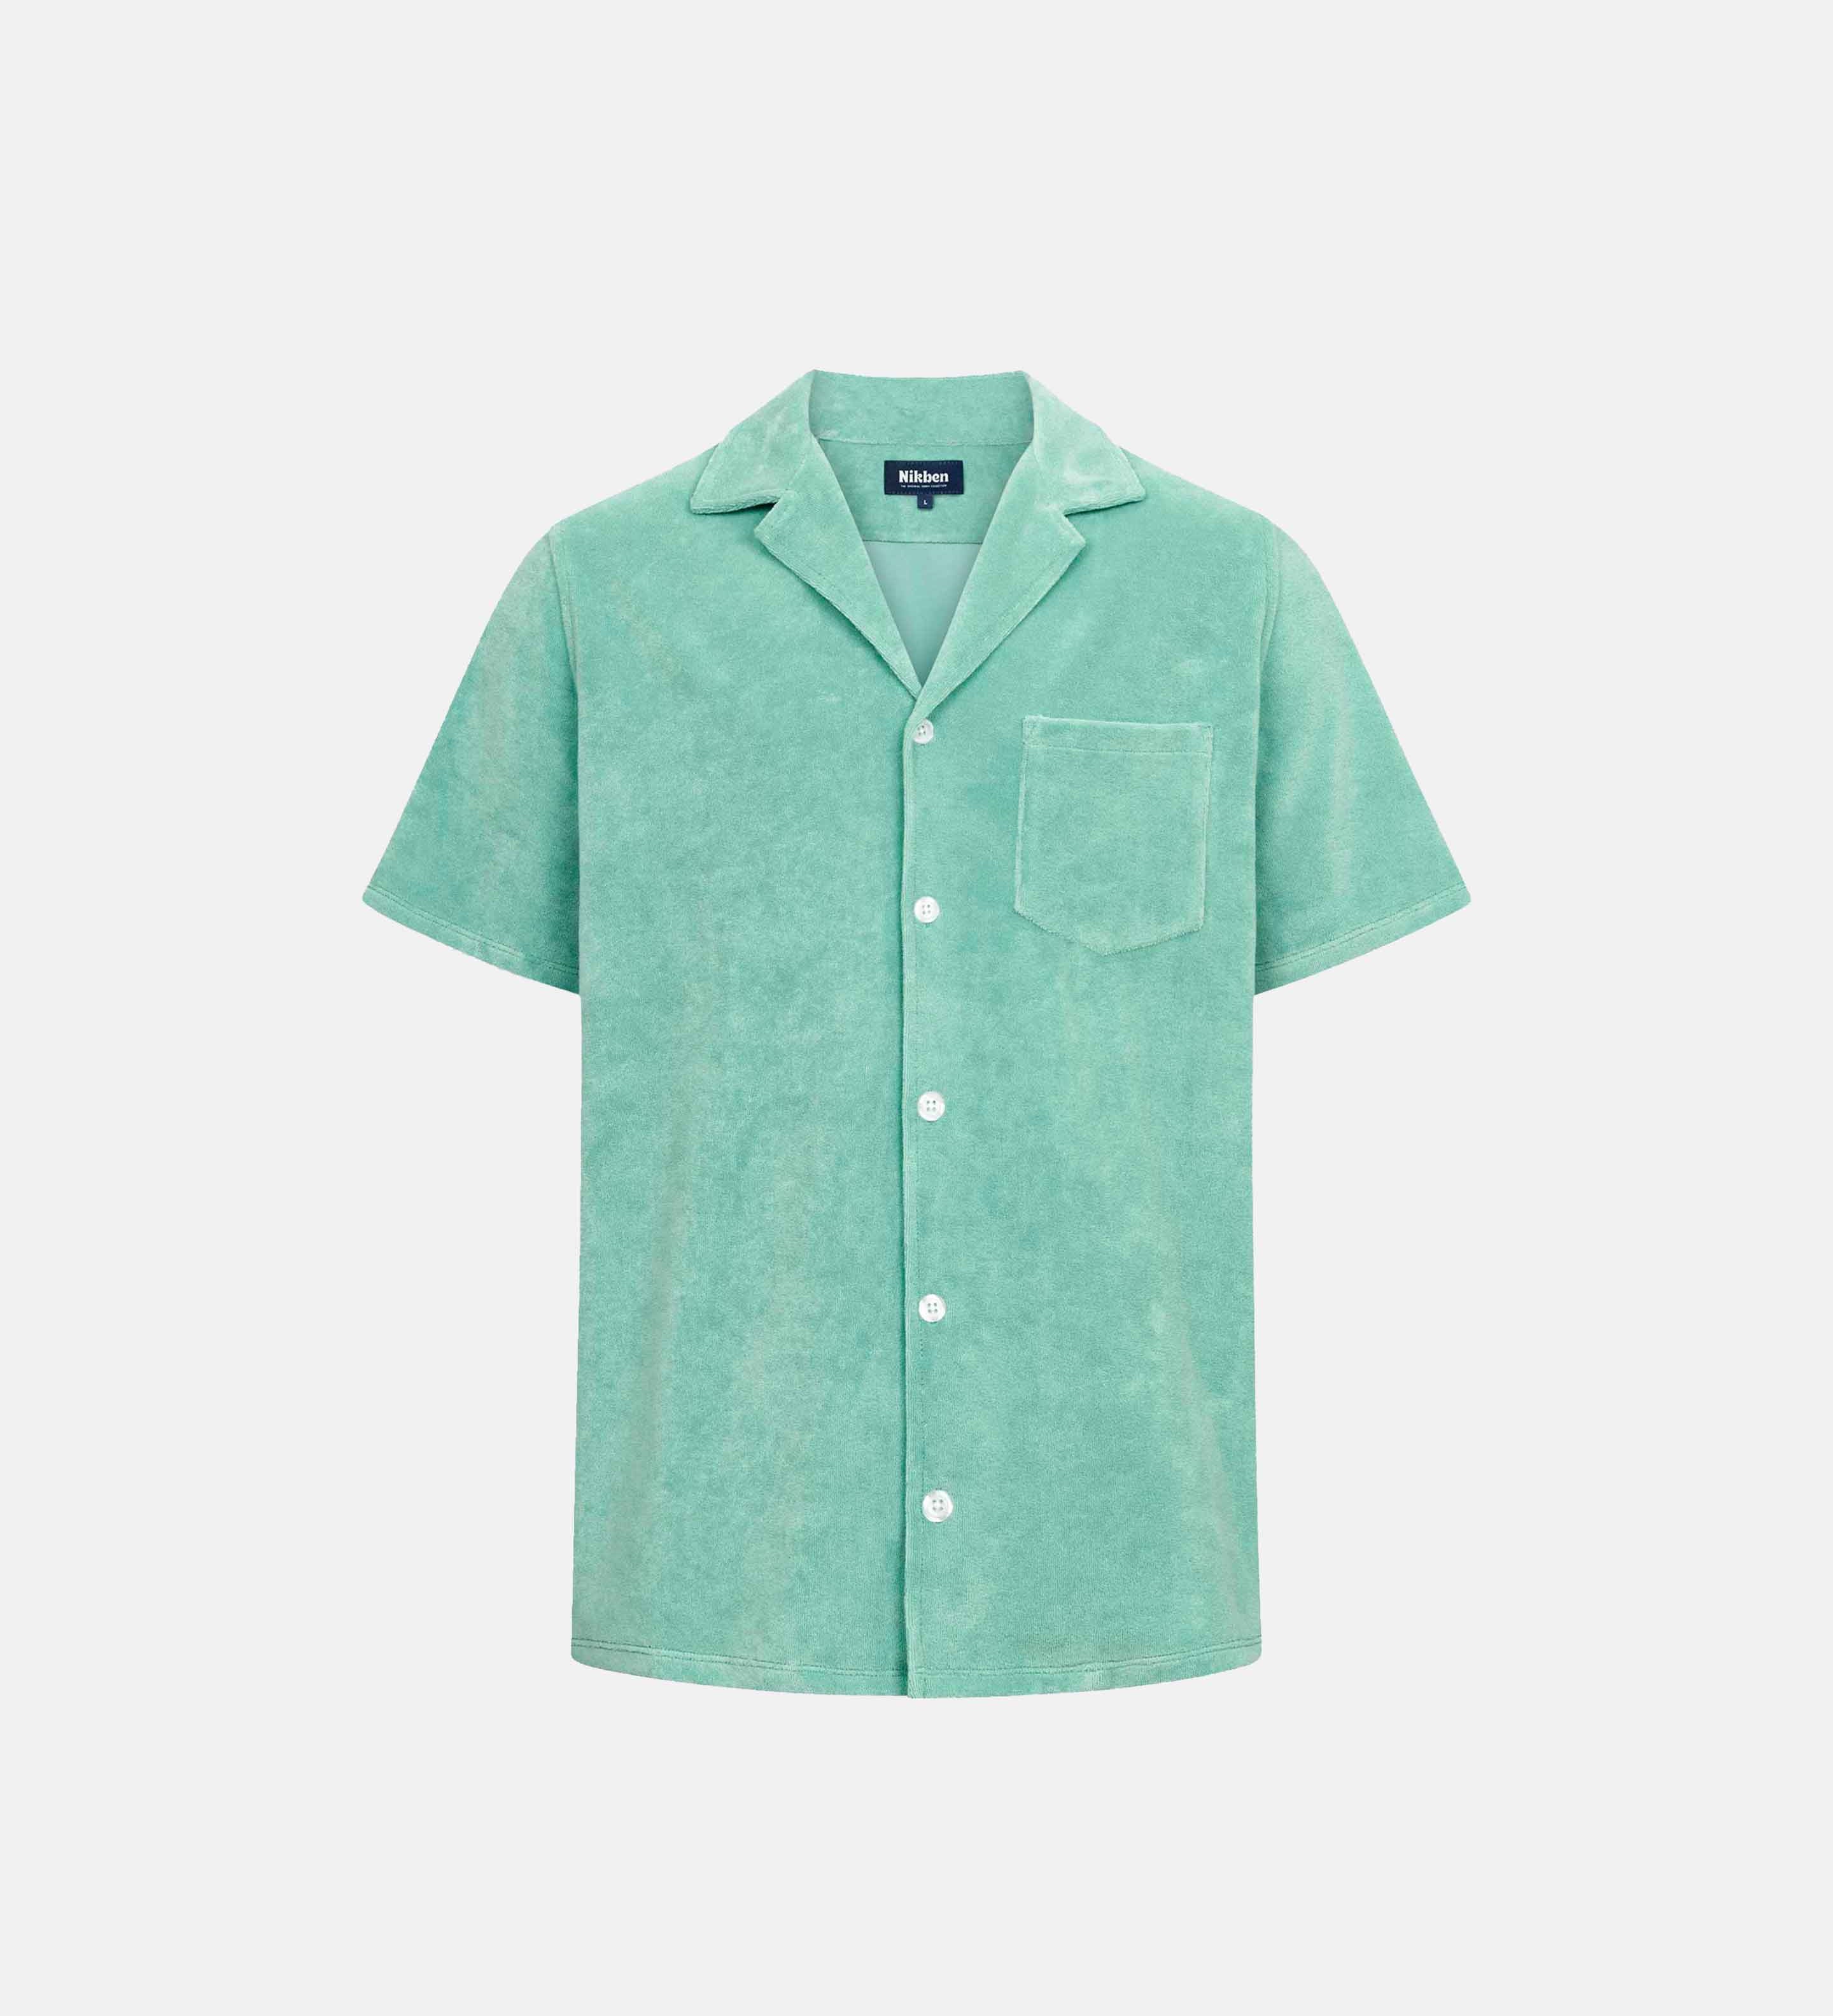 Grey-Green short sleeve shirt with white button closure and one chest pocket